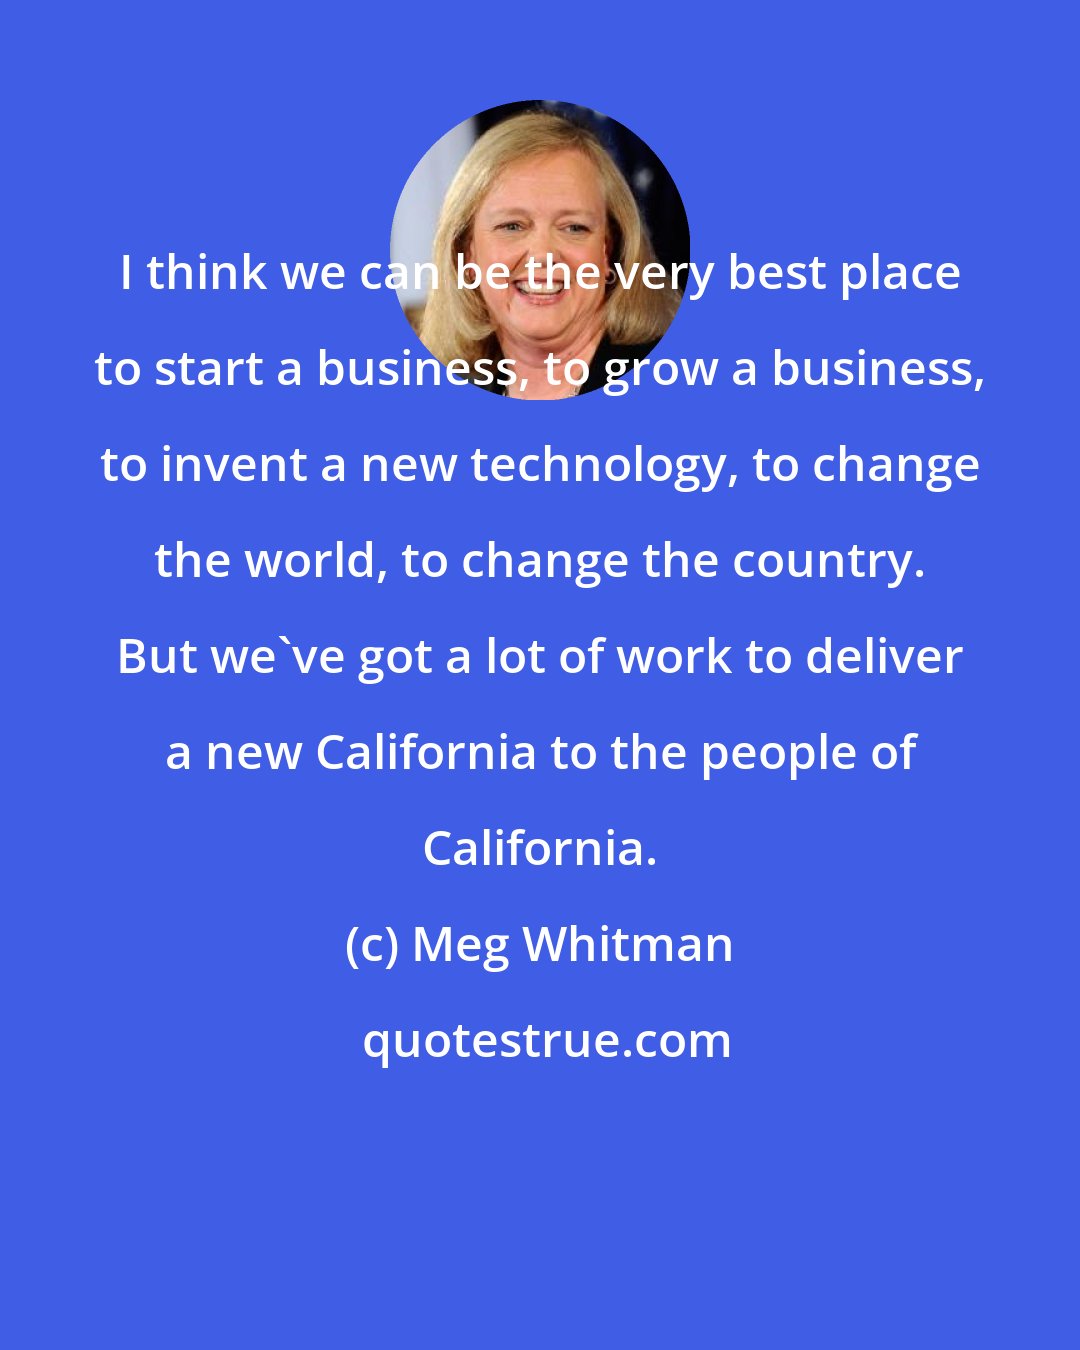 Meg Whitman: I think we can be the very best place to start a business, to grow a business, to invent a new technology, to change the world, to change the country. But we've got a lot of work to deliver a new California to the people of California.